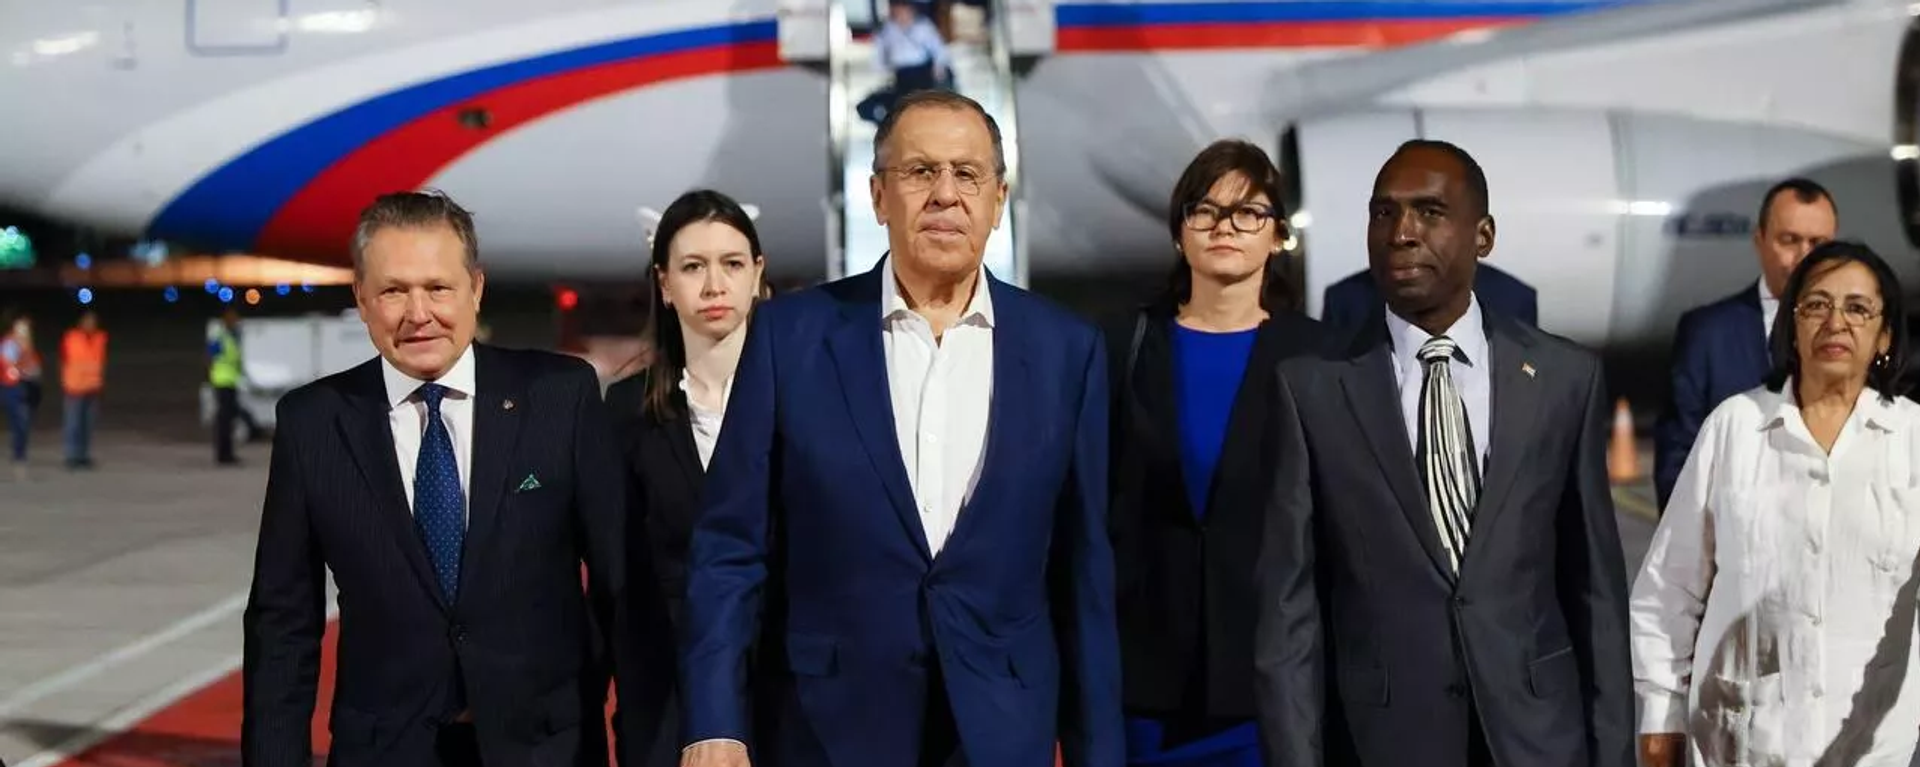 Russian Foreign Minister Sergei Lavrov during his trip to Cuba. - Sputnik Africa, 1920, 22.04.2023